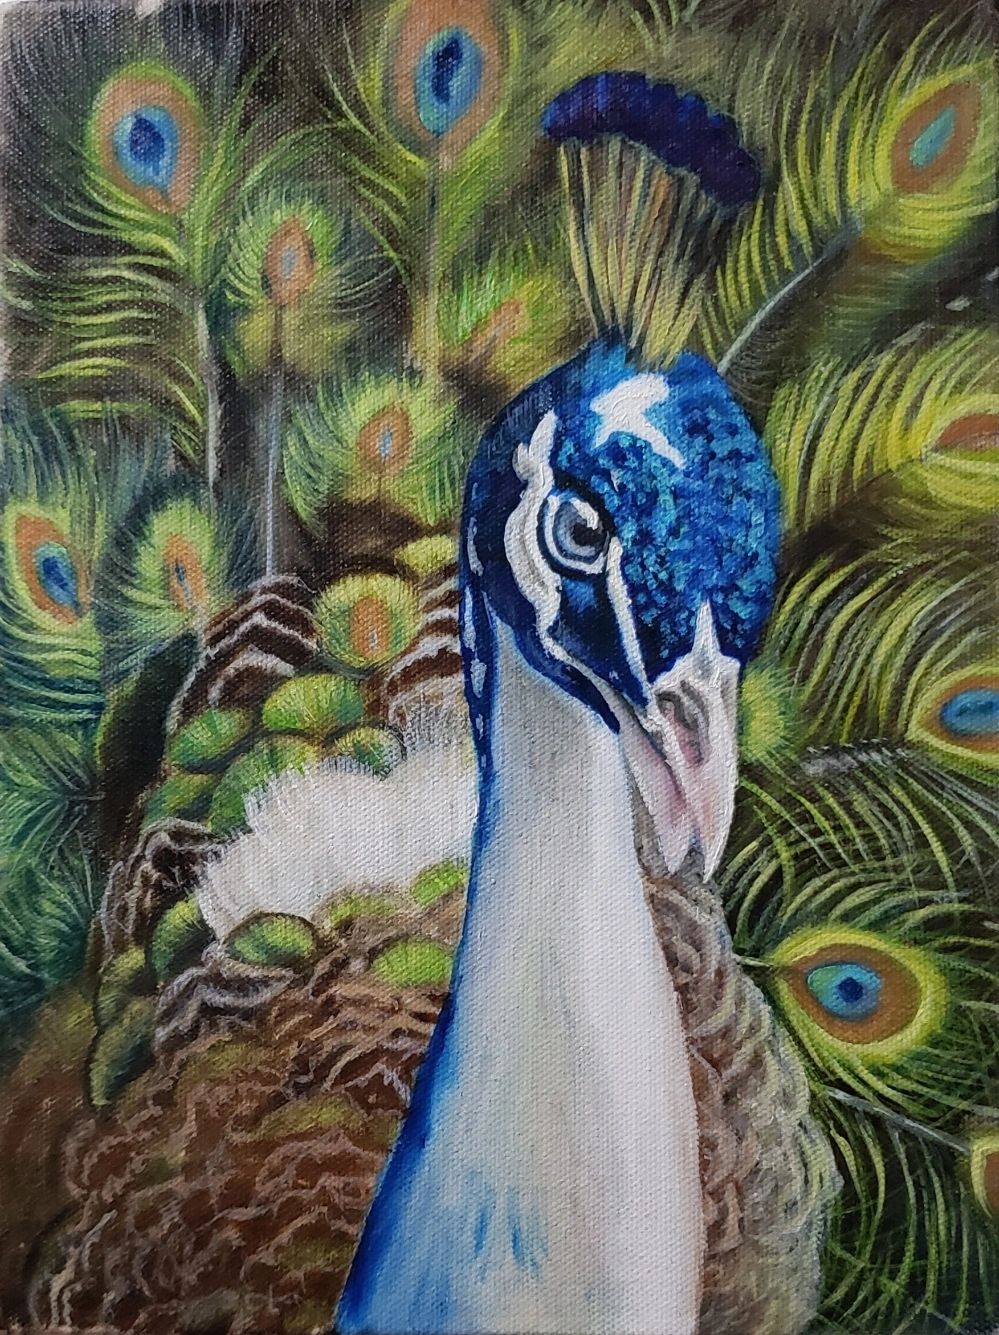 Fred my Peacock. 9"x12" oil on canvas.

SOLD 